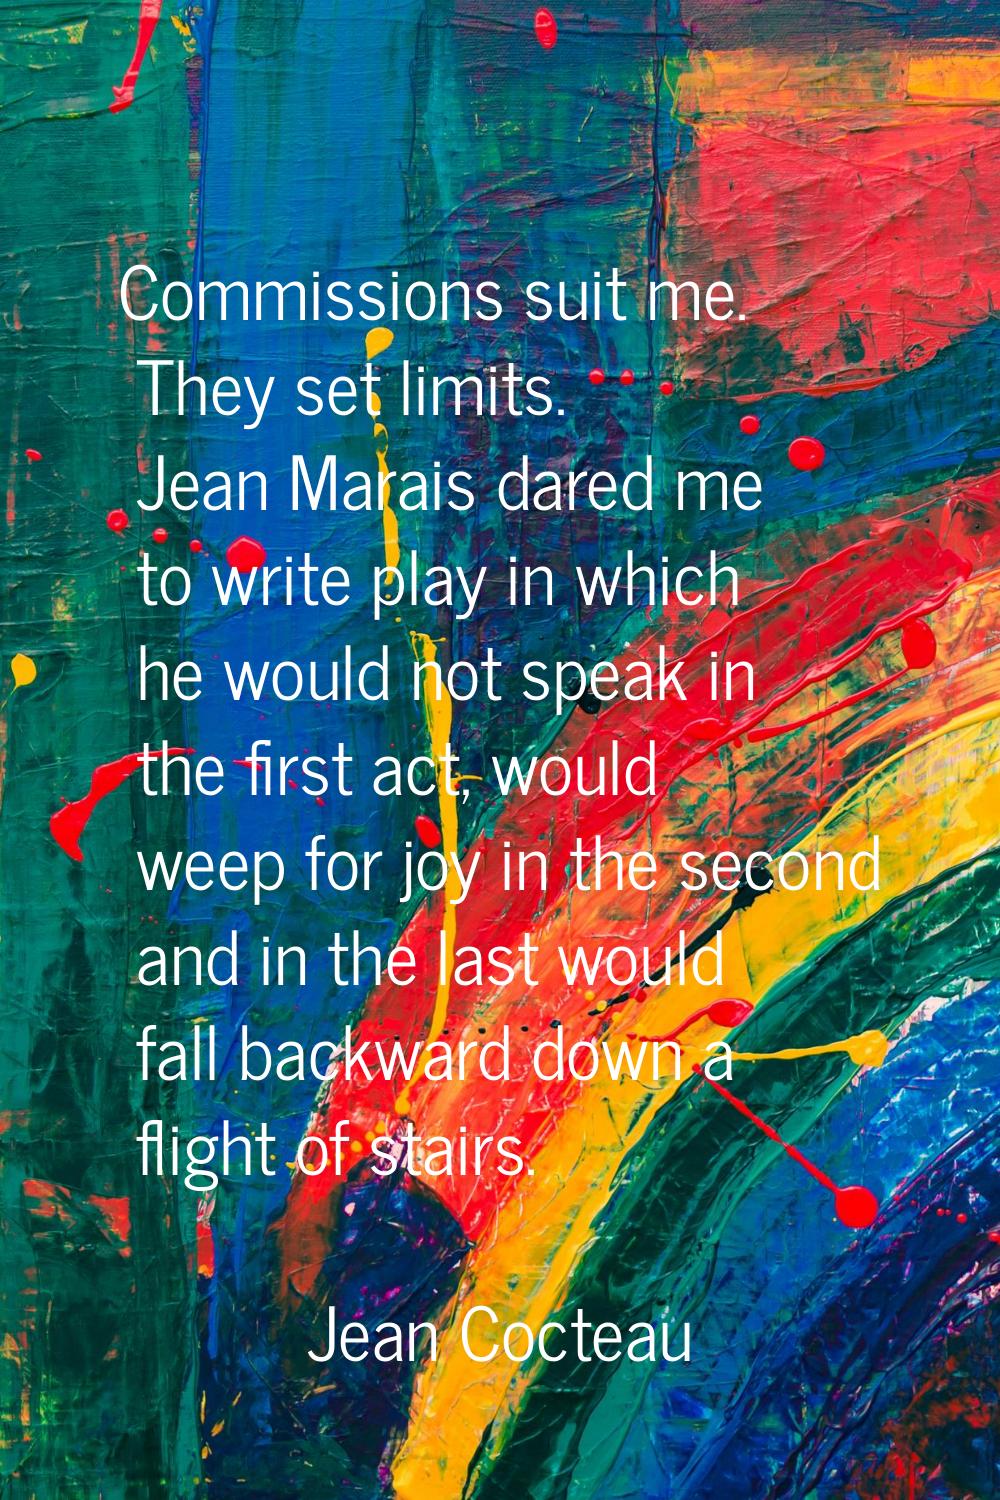 Commissions suit me. They set limits. Jean Marais dared me to write play in which he would not spea